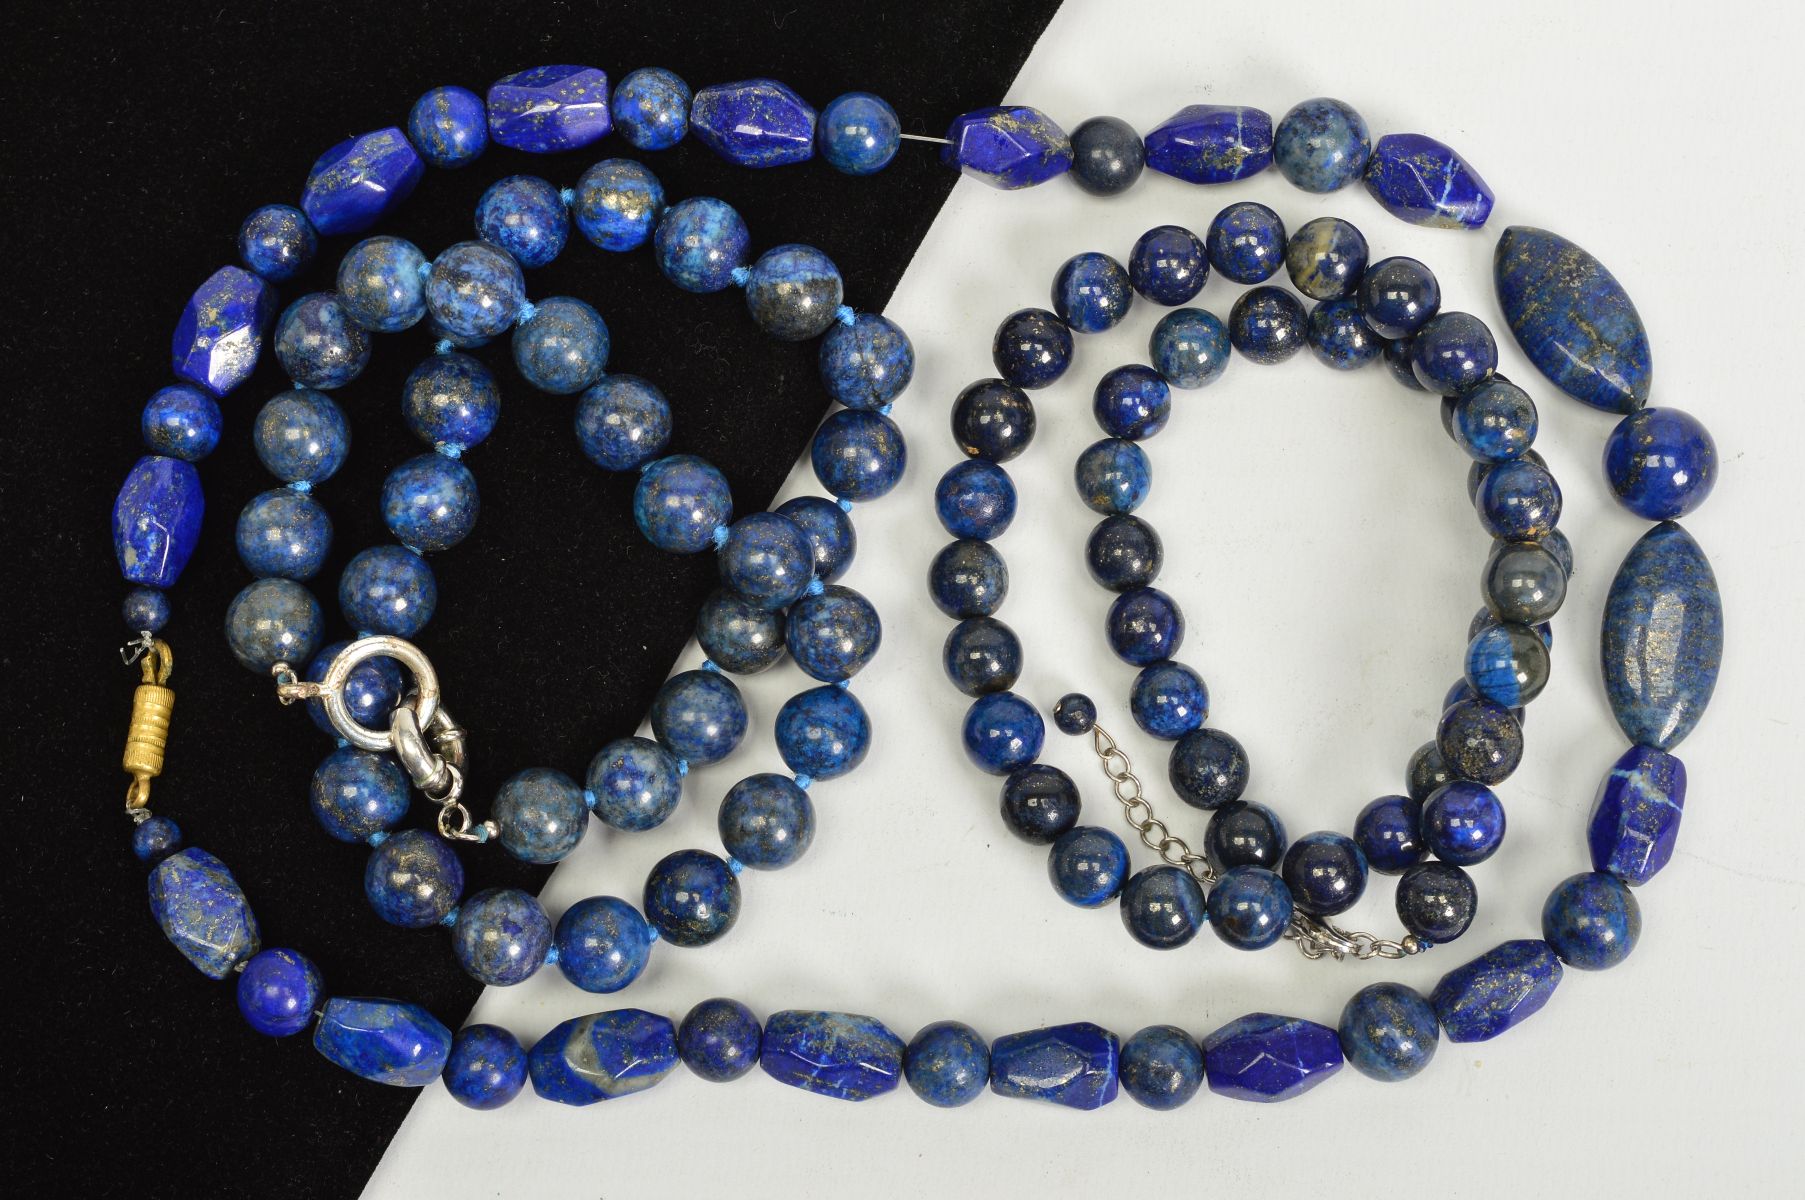 THREE LAPIS LAZULI BEAD NECKLACES, two designed as uniform spherical beads, both with spring release